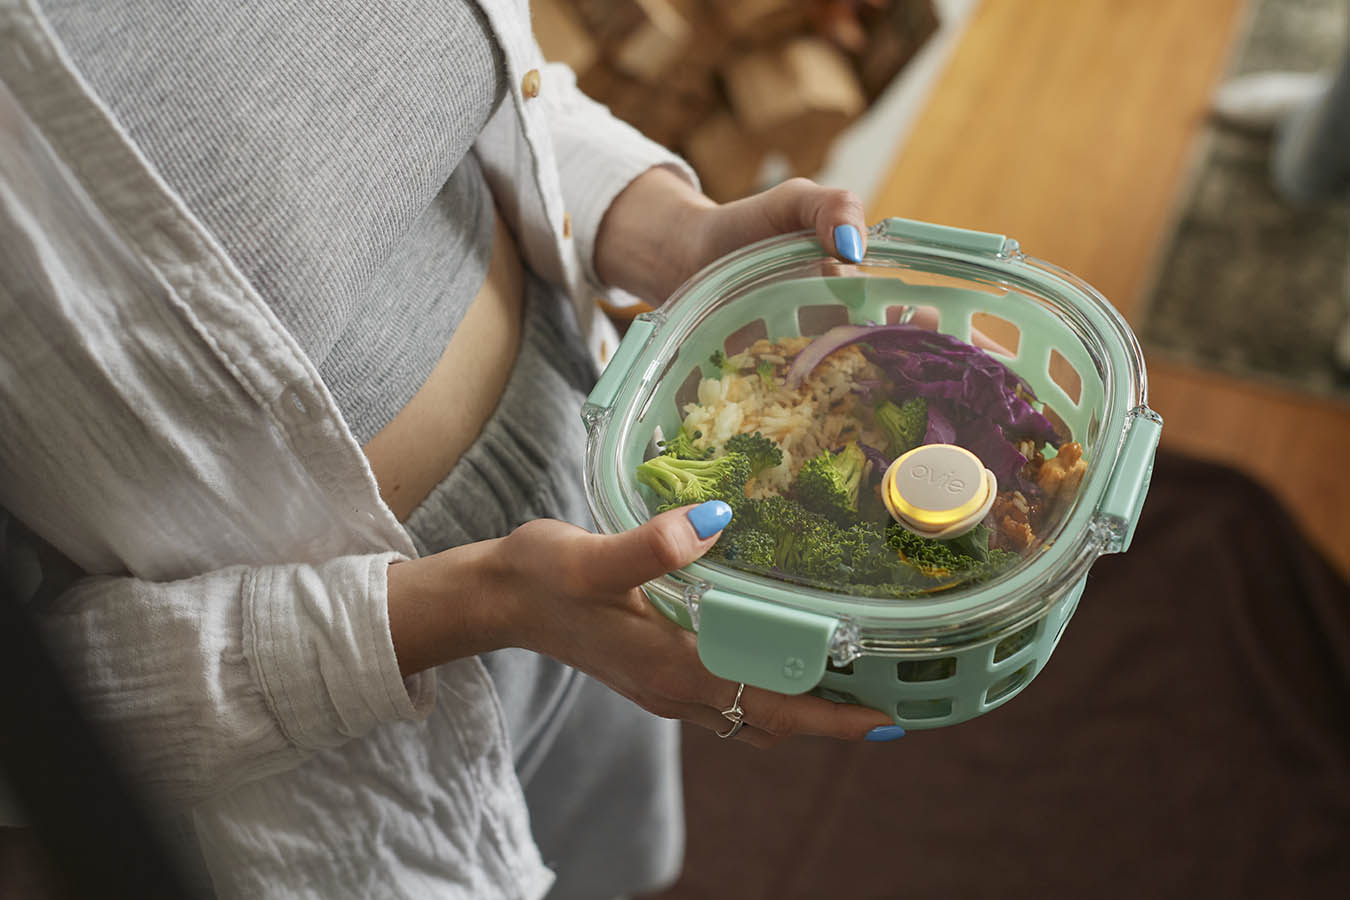 What do you call the household food storage containers that you use to hold  food that you've prepped, cooked, or have as leftovers? Do you use a  generic term or do you